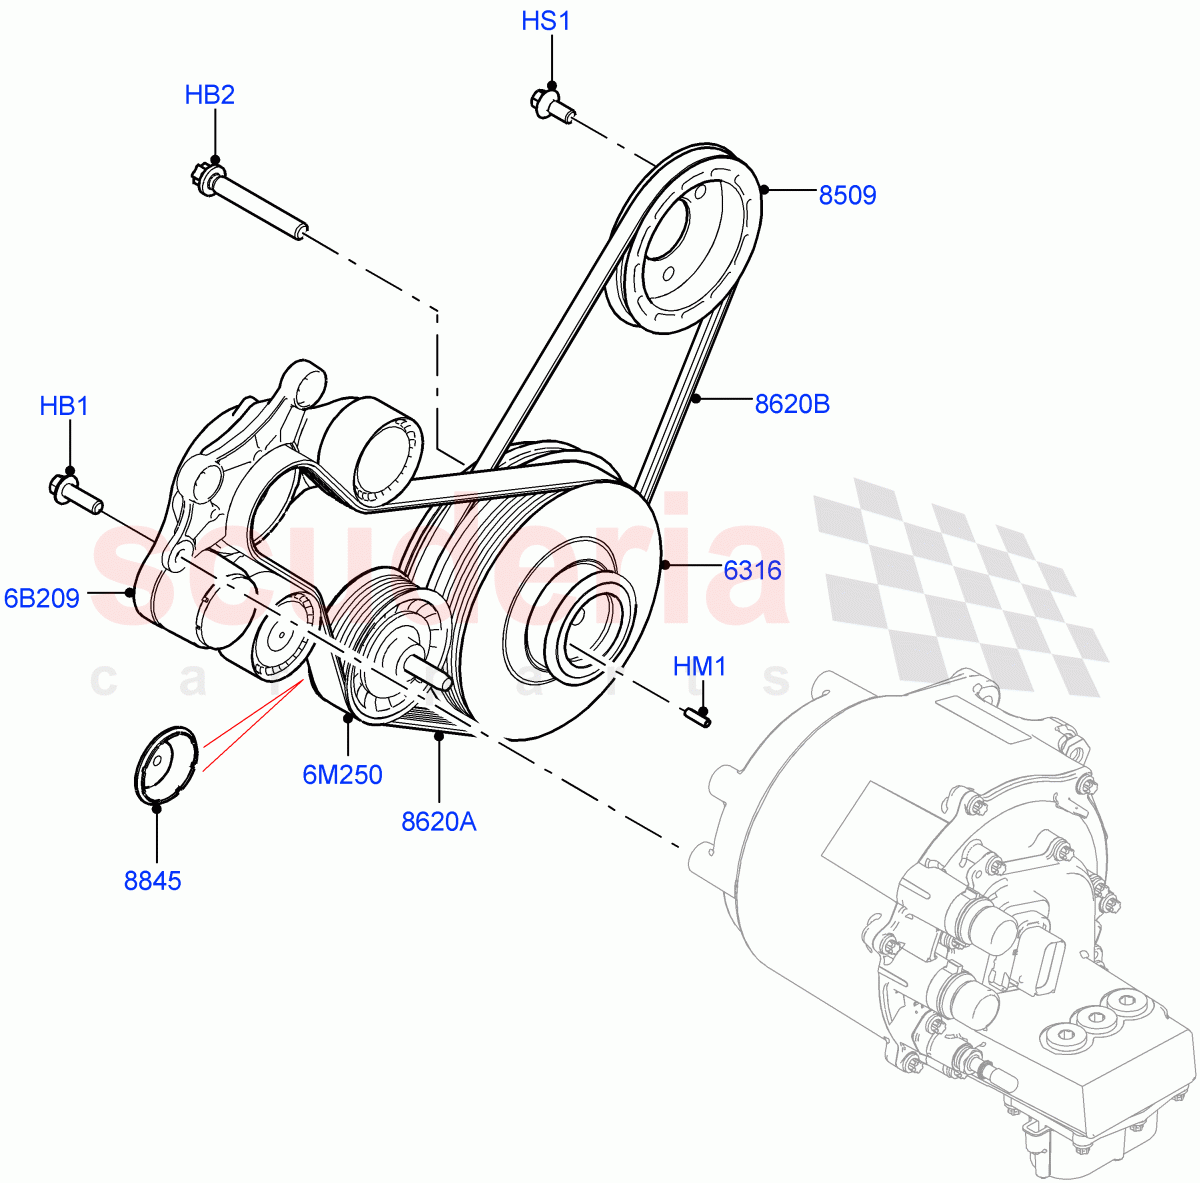 Pulleys And Drive Belts(1.5L AJ20P3 Petrol High PHEV,Changsu (China))((V)FROMKG446857) of Land Rover Land Rover Range Rover Evoque (2019+) [1.5 I3 Turbo Petrol AJ20P3]